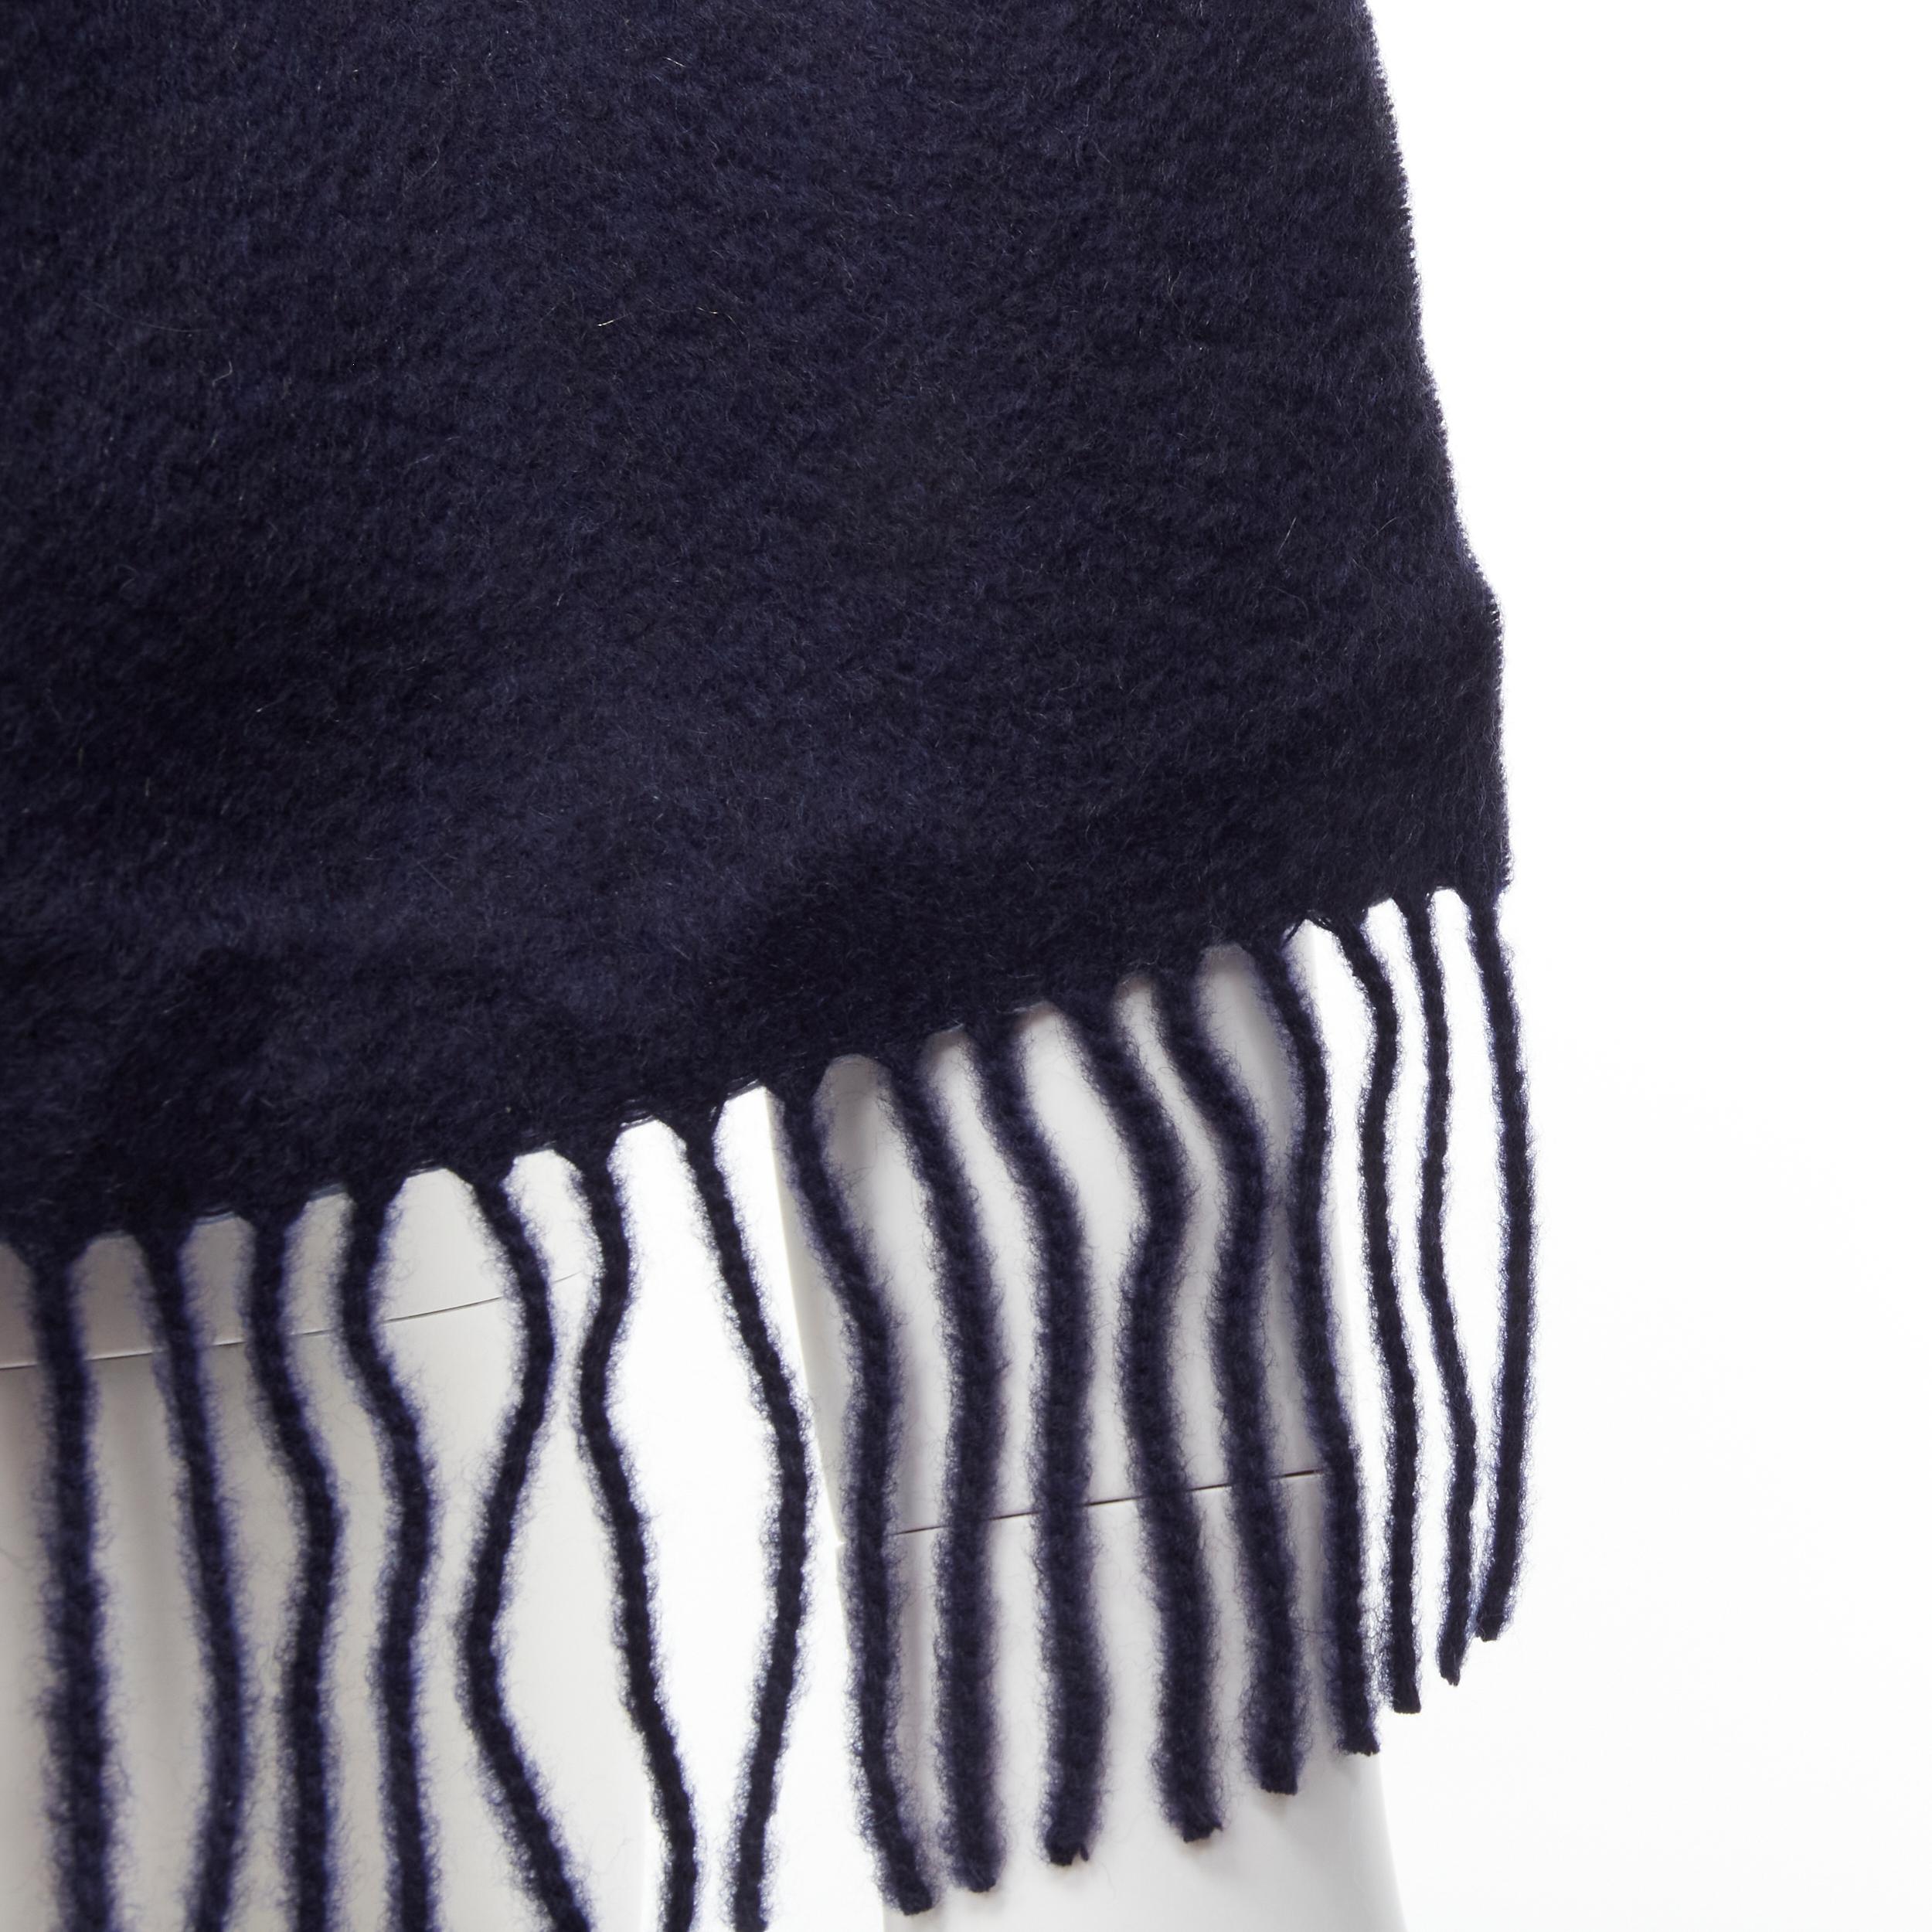 new PRINGLE OF SCOTLAND 100% cashmere navy blue tassel fringe scarf 
Reference: MAWG/A00076 
Brand: Pringle of Scotland 
Material: Cashmere 
Color: Blue 
Pattern: Solid 
Extra Detail: Tassel fringe scarf. 
Made in: Scotland 

CONDITION: 
Condition: